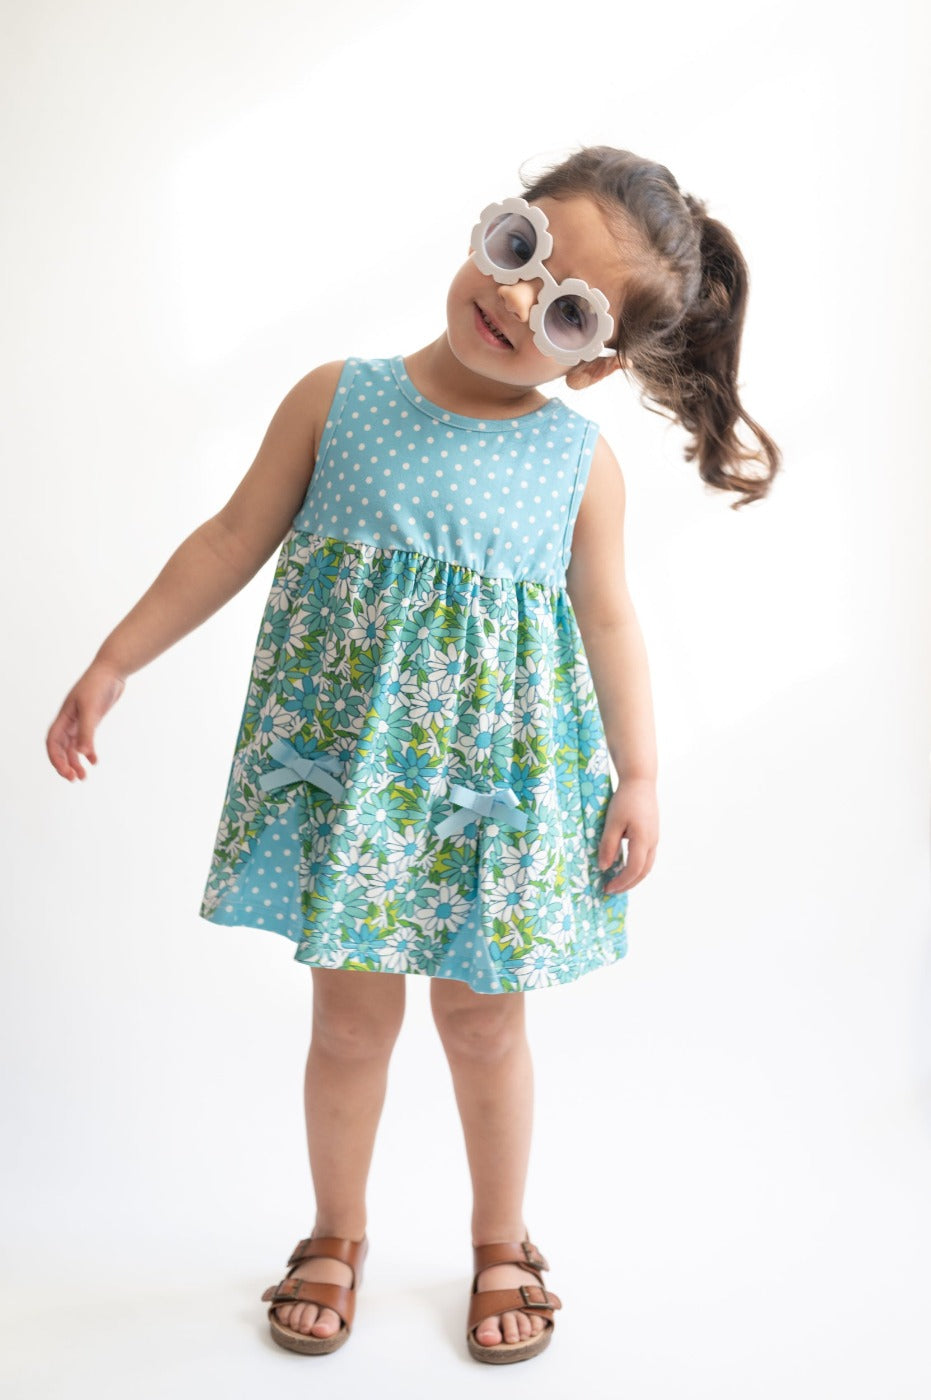 Blue Flower Power And Polka Dot Dress For Baby And Toddler Girls